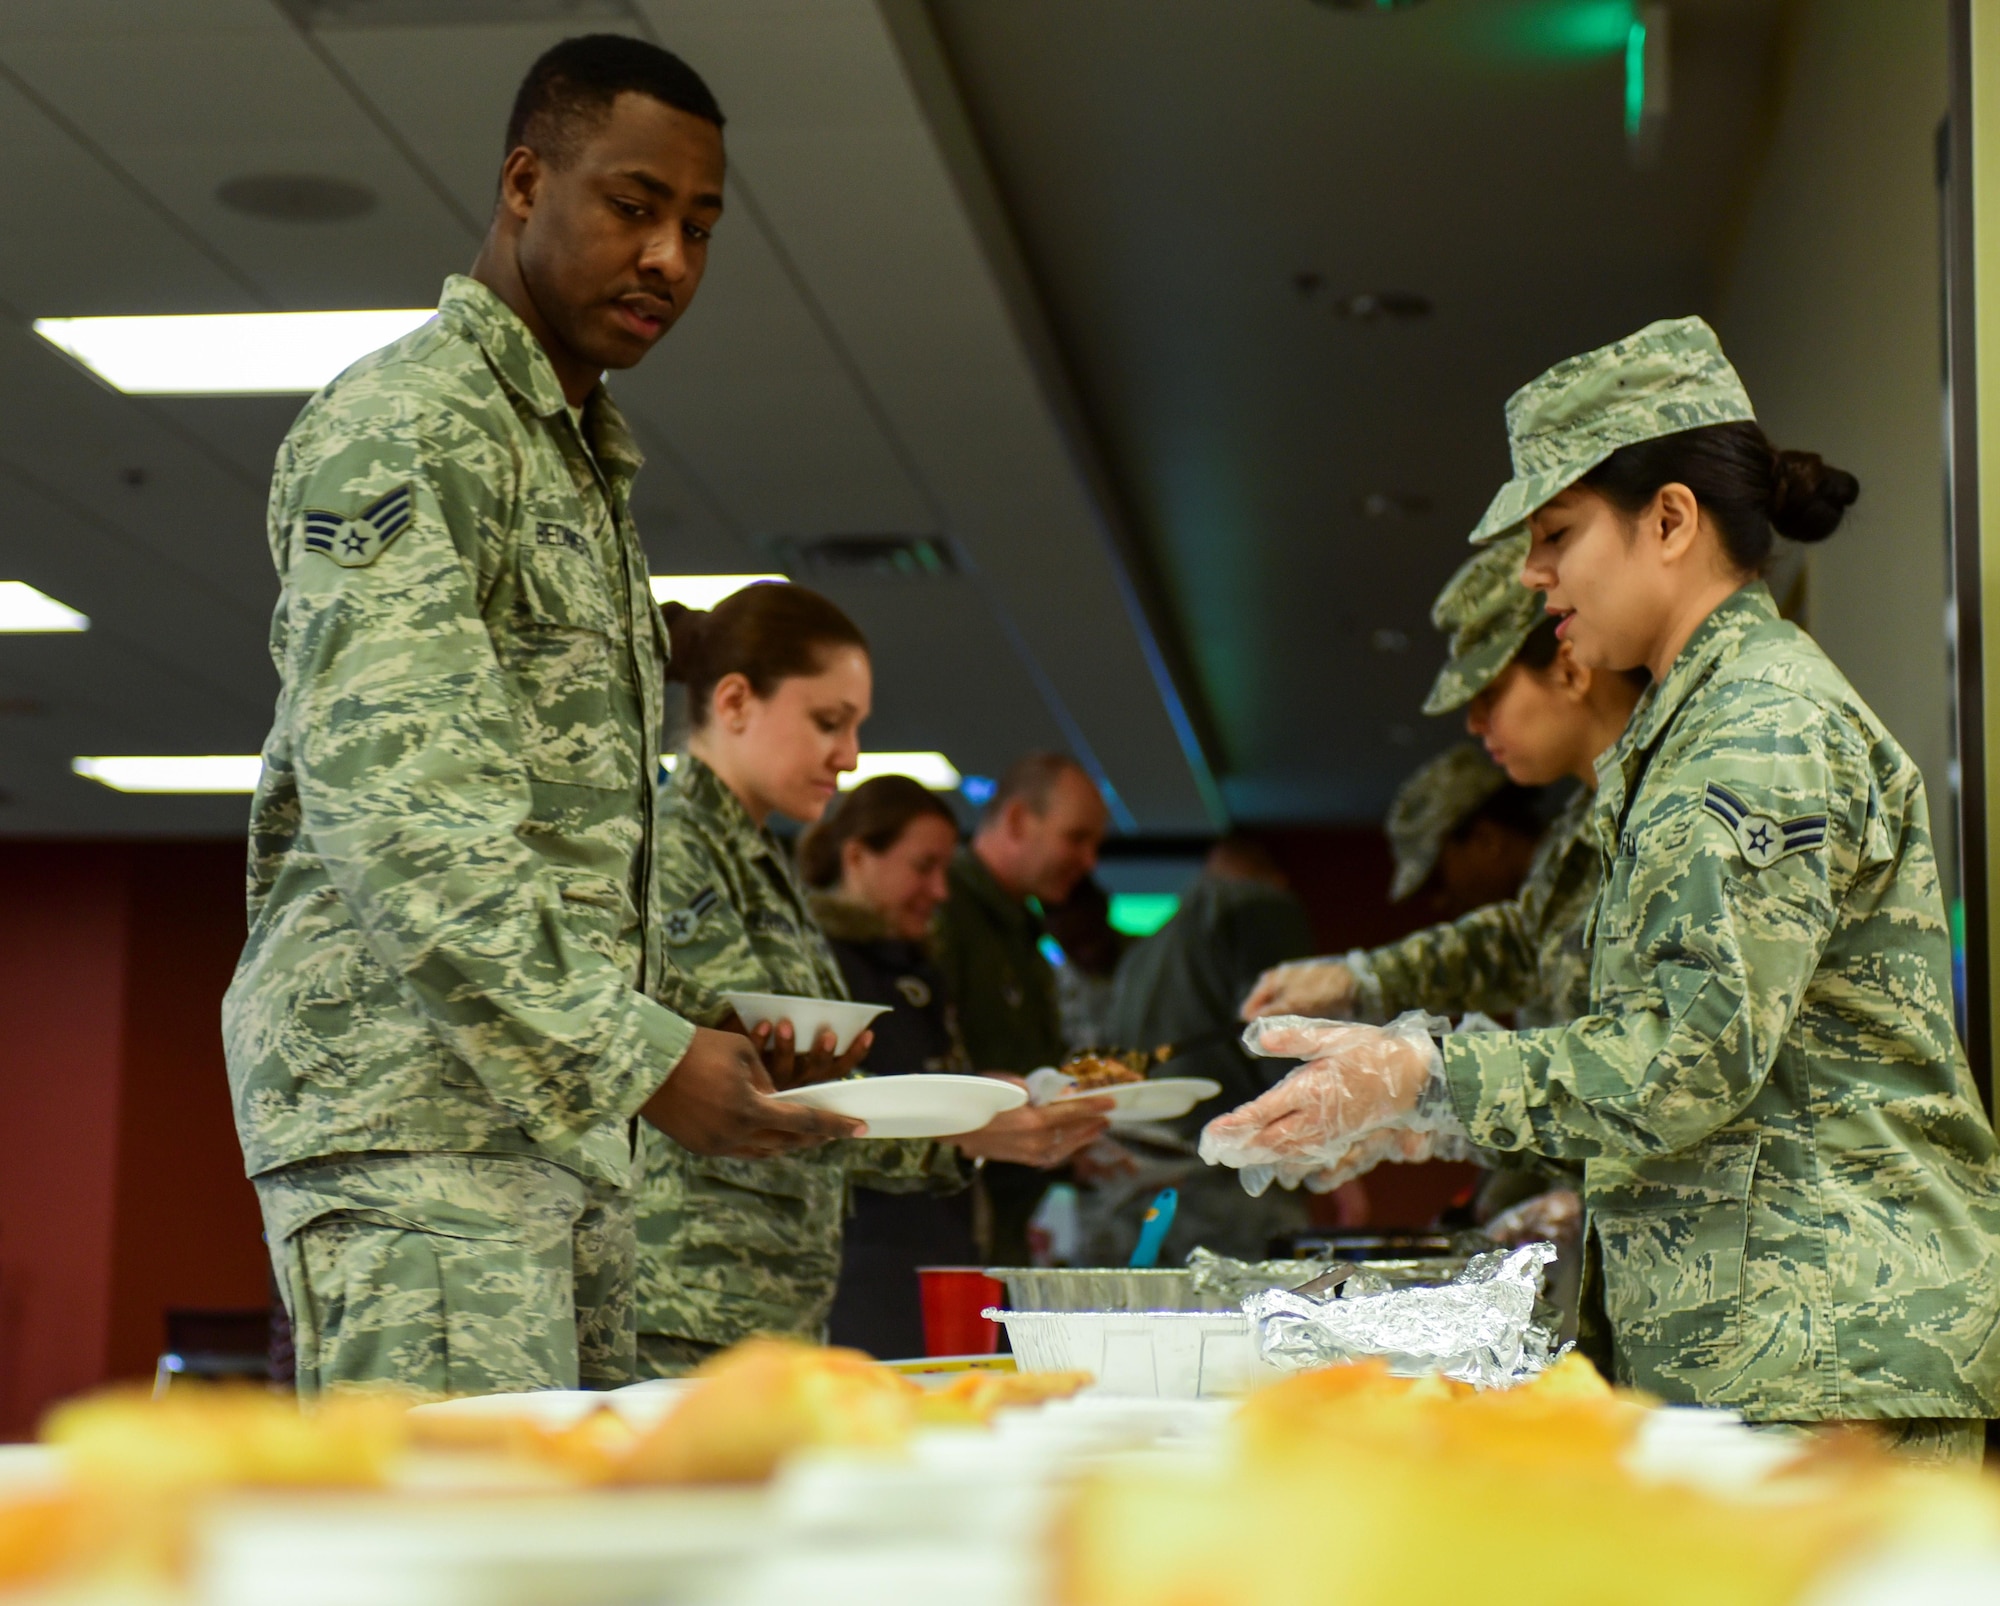 Airmen shuffle through a line, filling their plates with food during the African American Heritage Month celebration inside the Deployment Center at Ellsworth Air Force Base, S.D., Feb. 28, 2017. Shrimp jambalaya, grits and beans were just some of the kinds of food served. (U.S. Air Force photo by Airman 1st Class Randahl J. Jenson) 